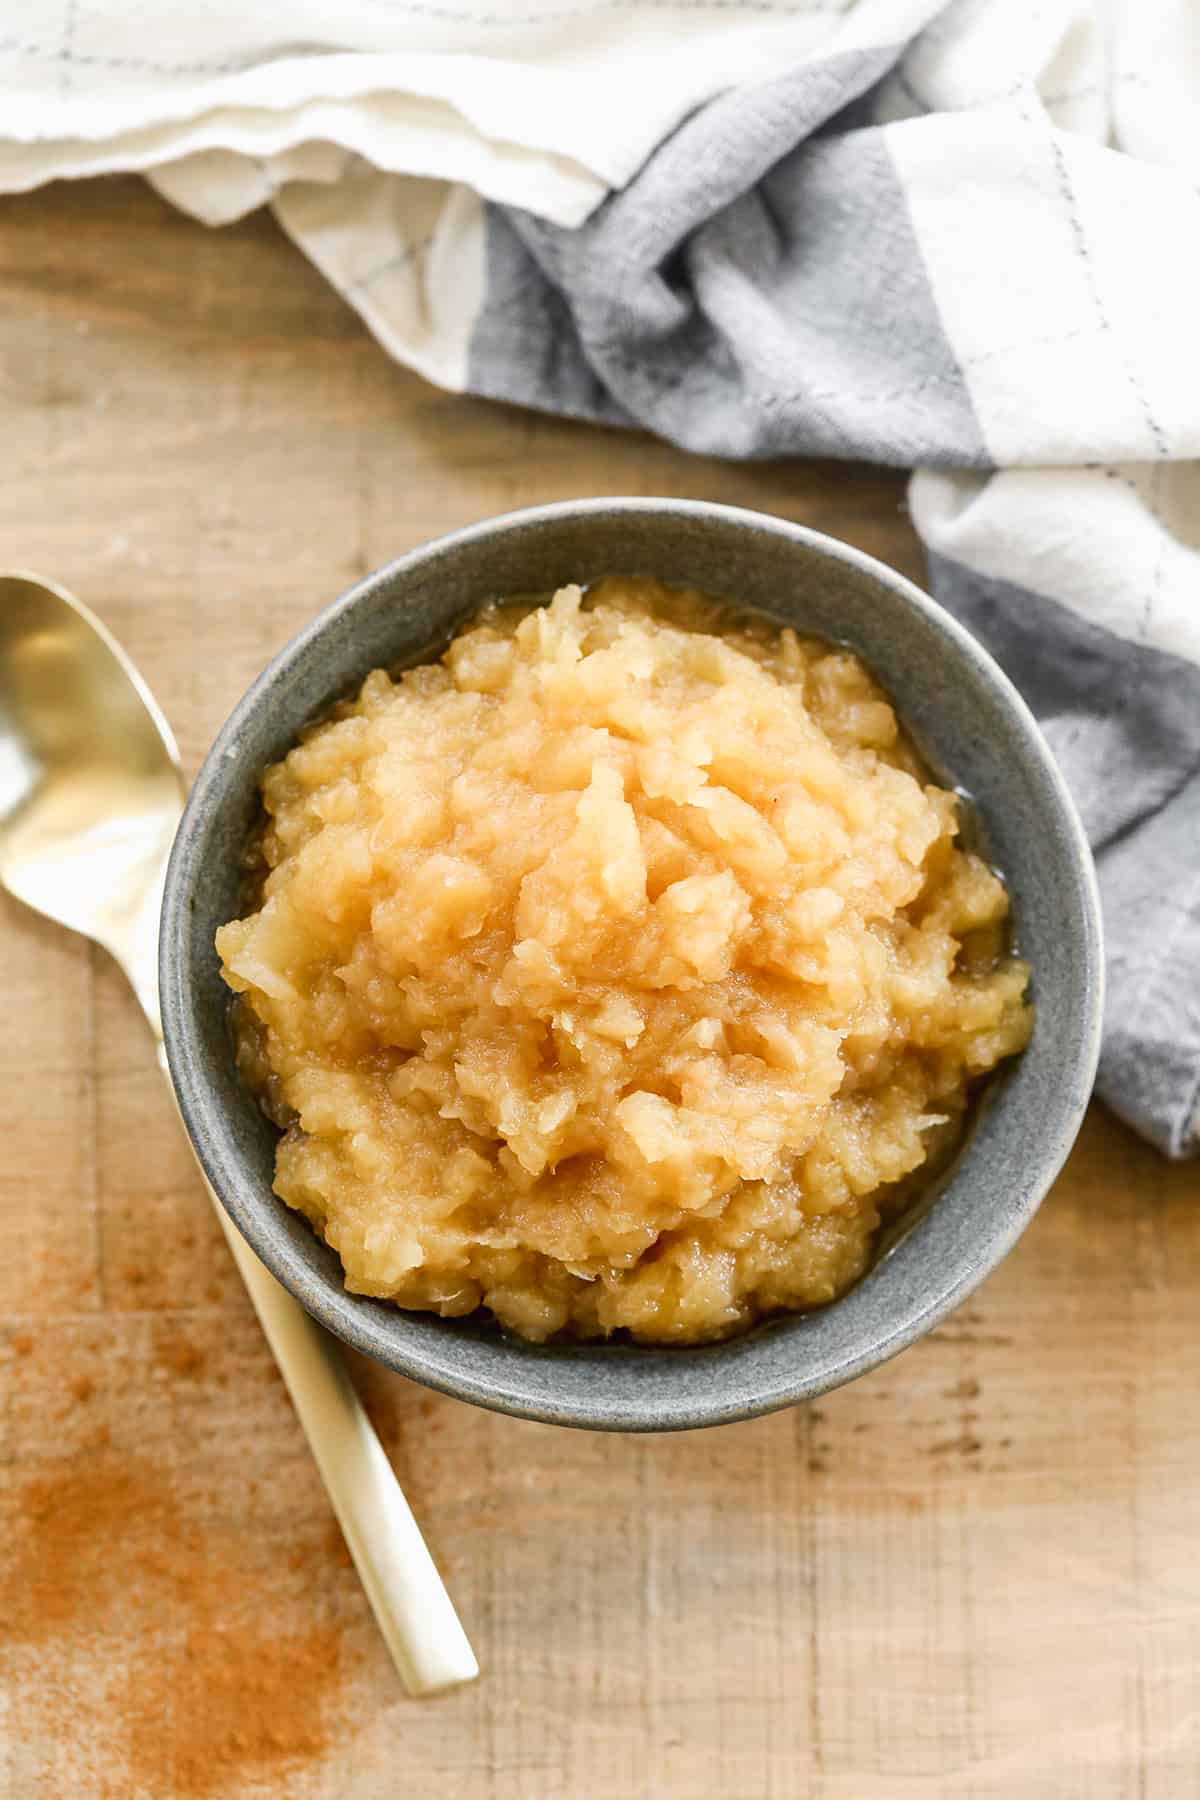 A bowl of homemade applesauce with a spoon, ready to enjoy.